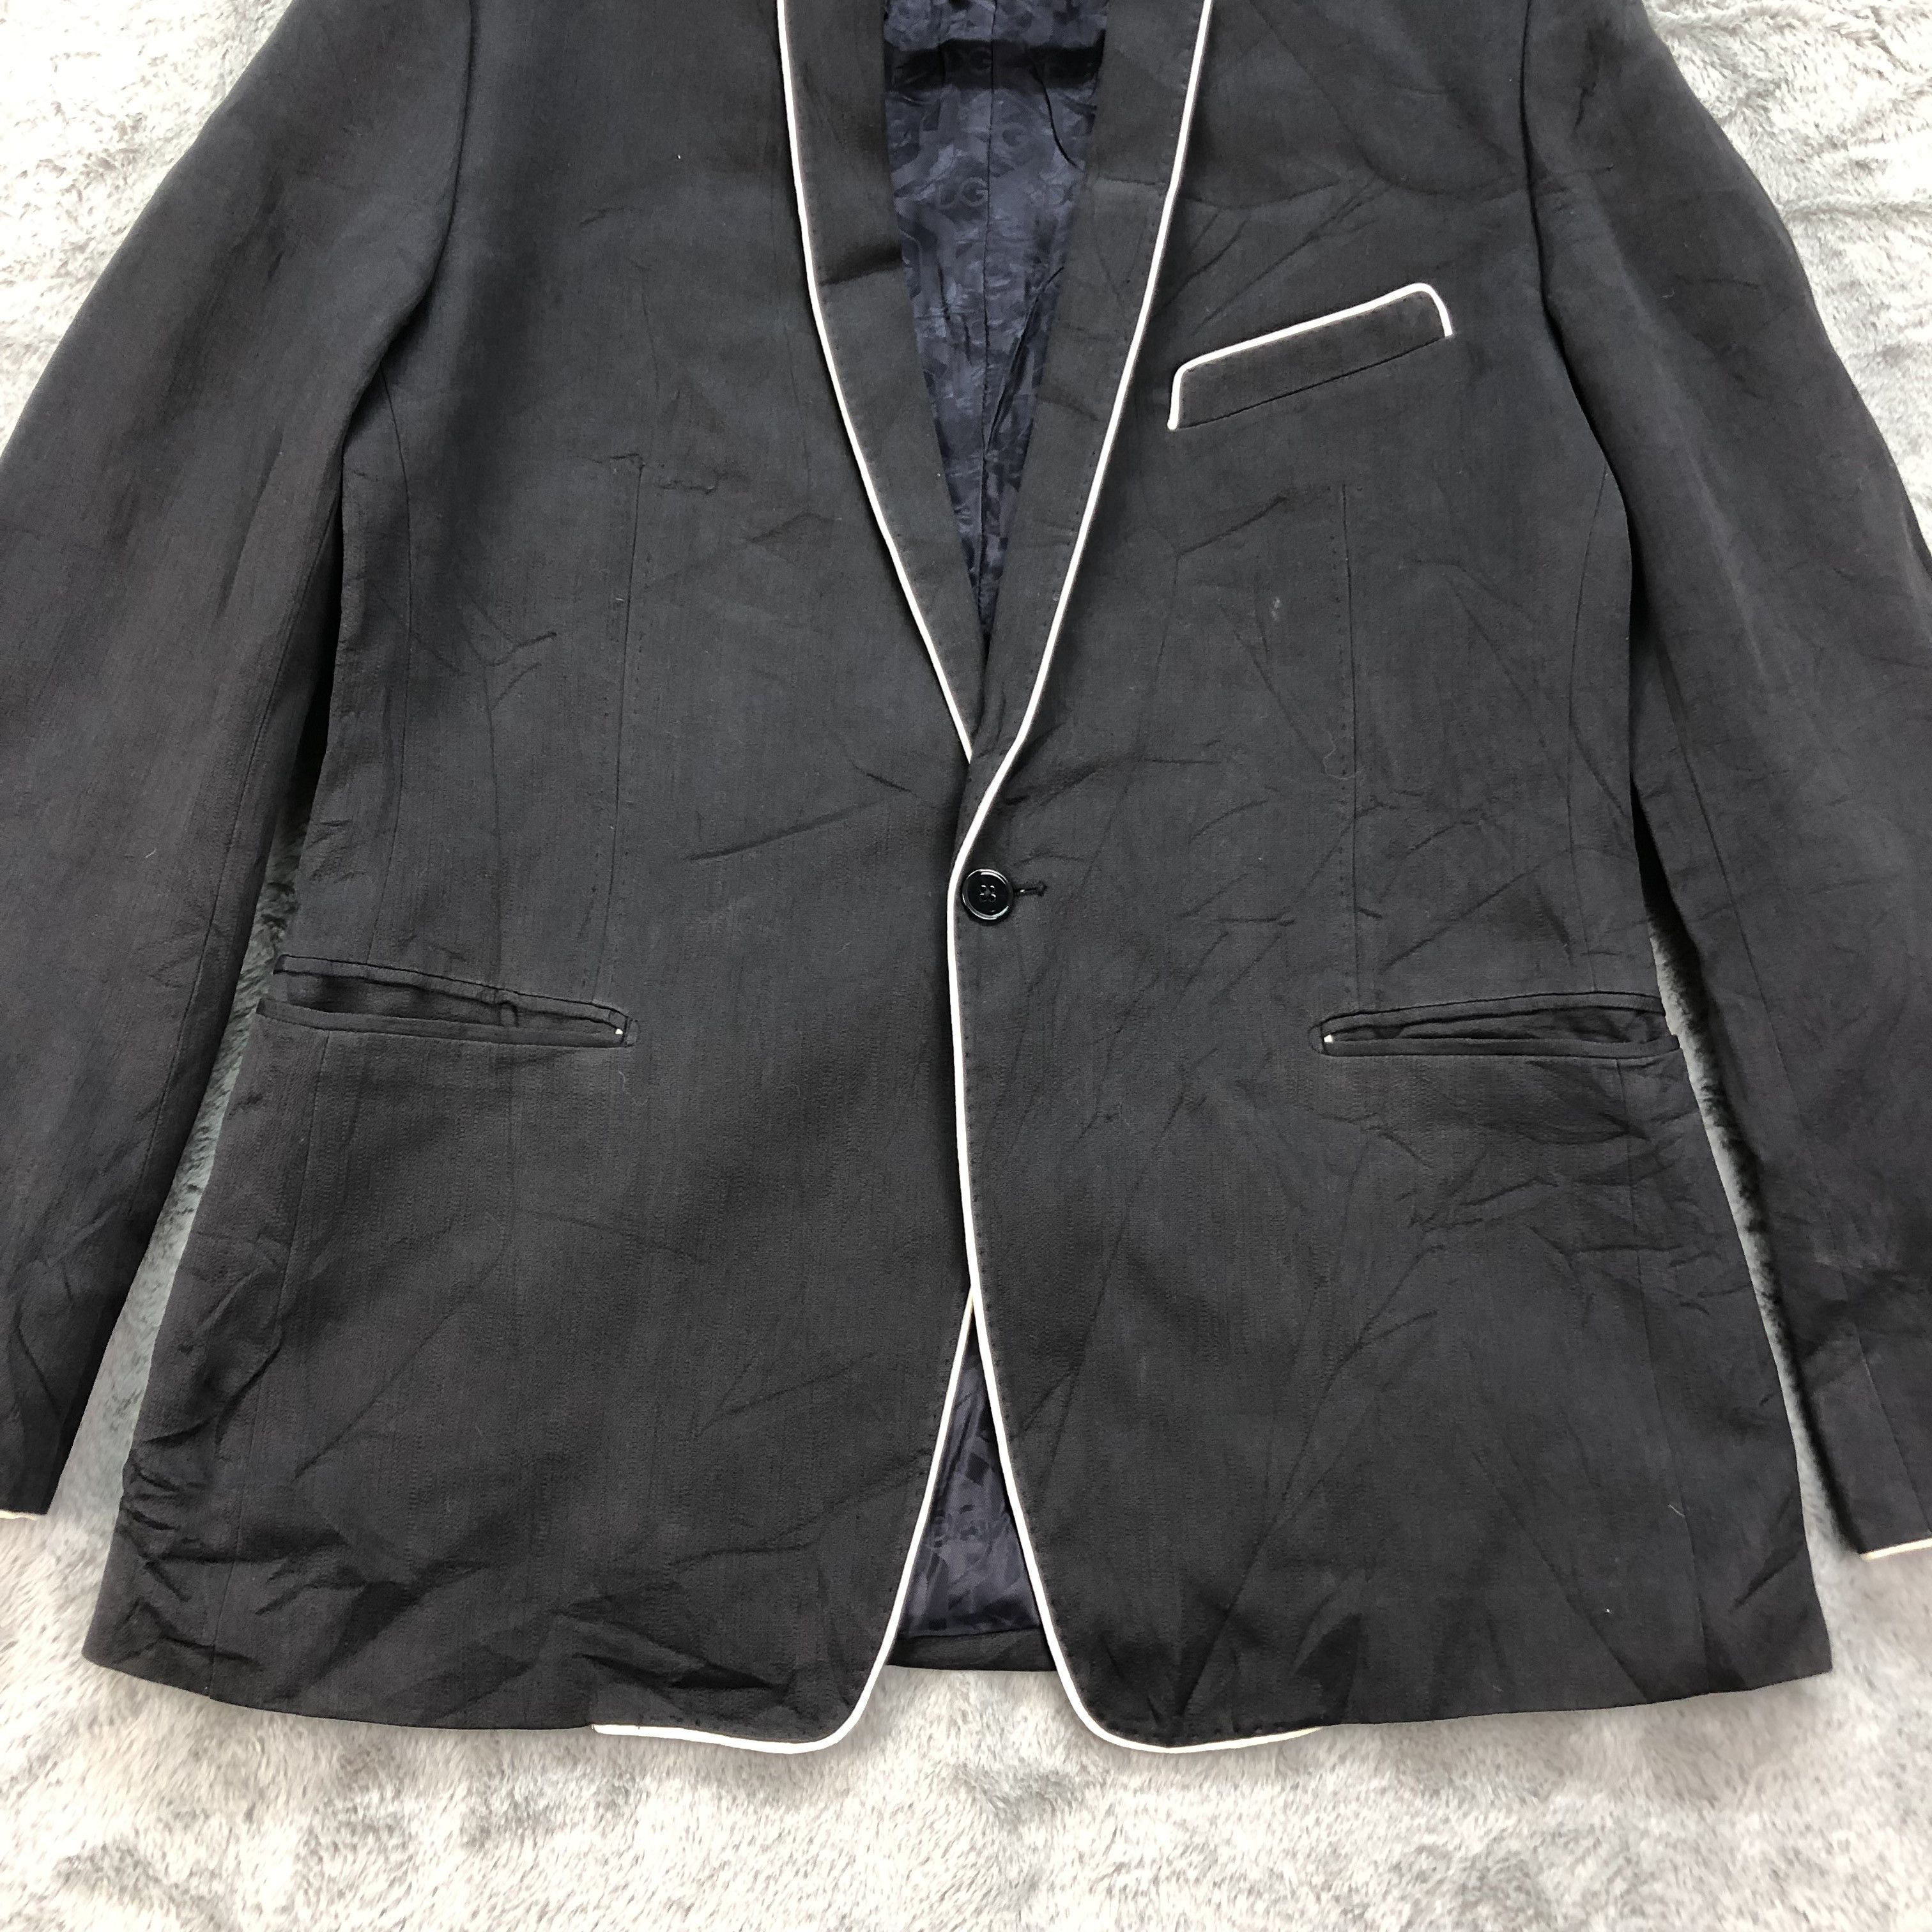 Dolce & Gabbana Made in Italy Suits Jacket #4565-159 - 3